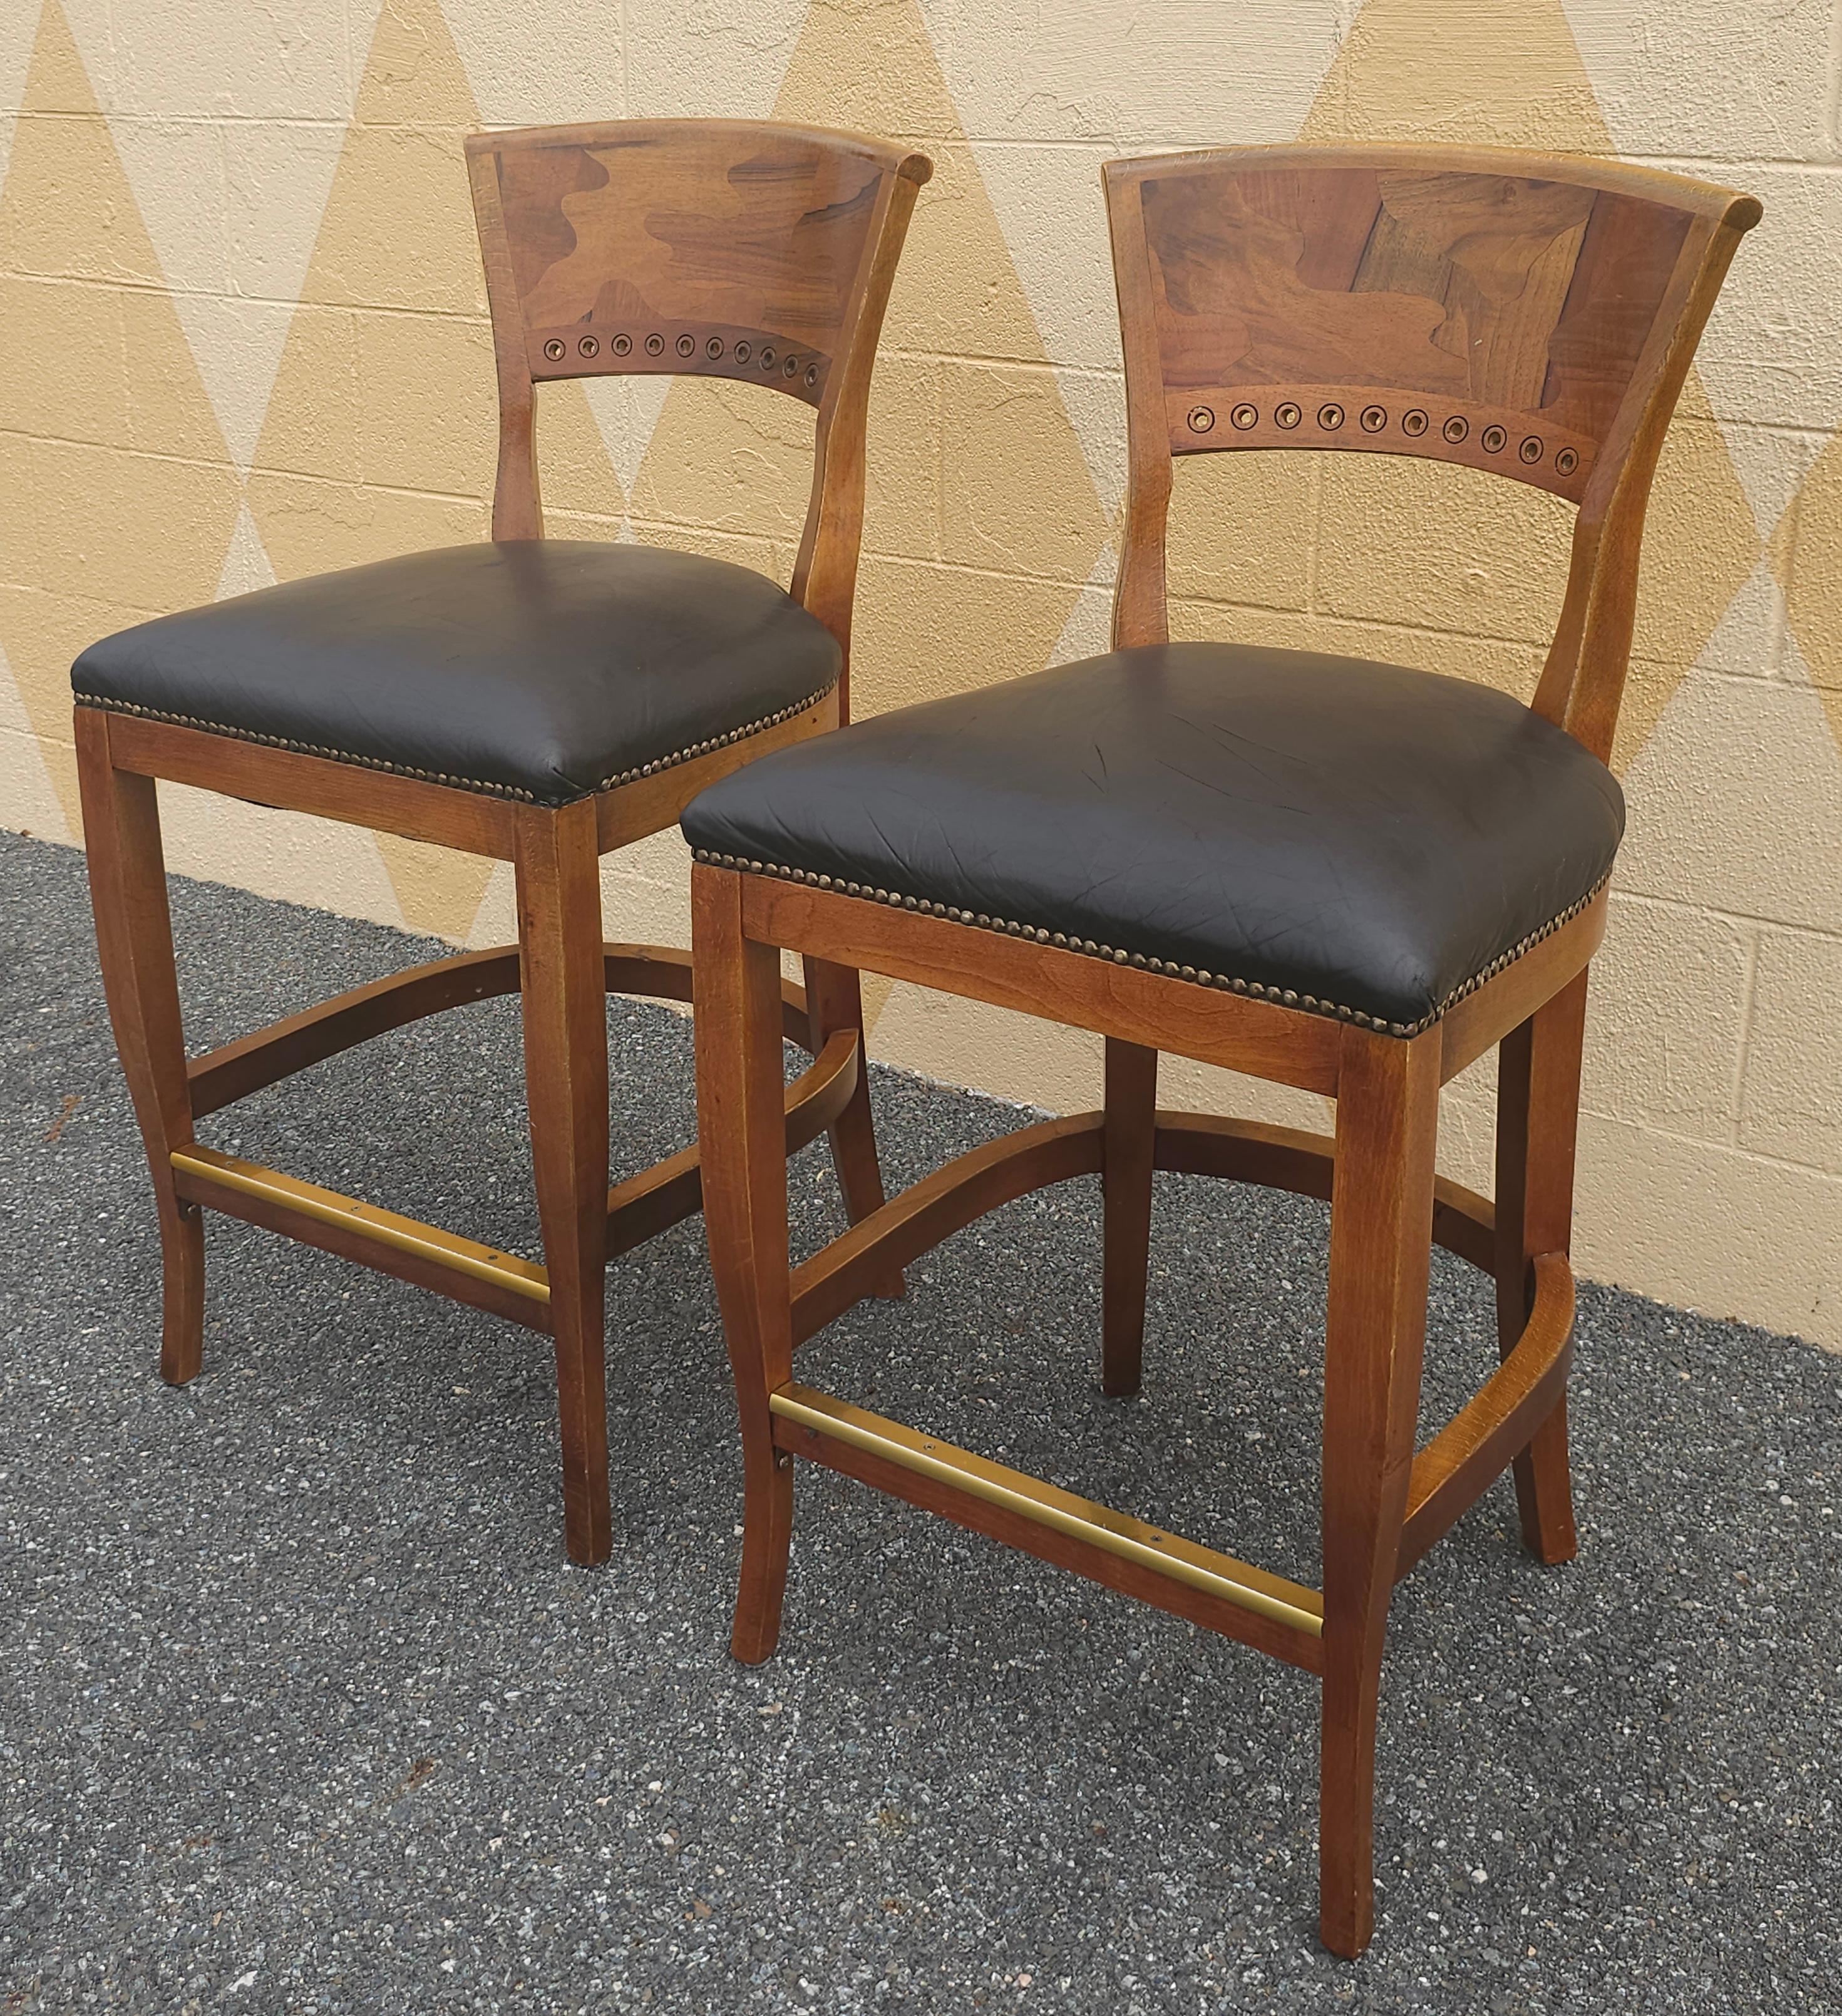 Other Italian Mixed Fruitwoods Top Grain Leather Upholstery w/ Brass NailHeads Stools For Sale